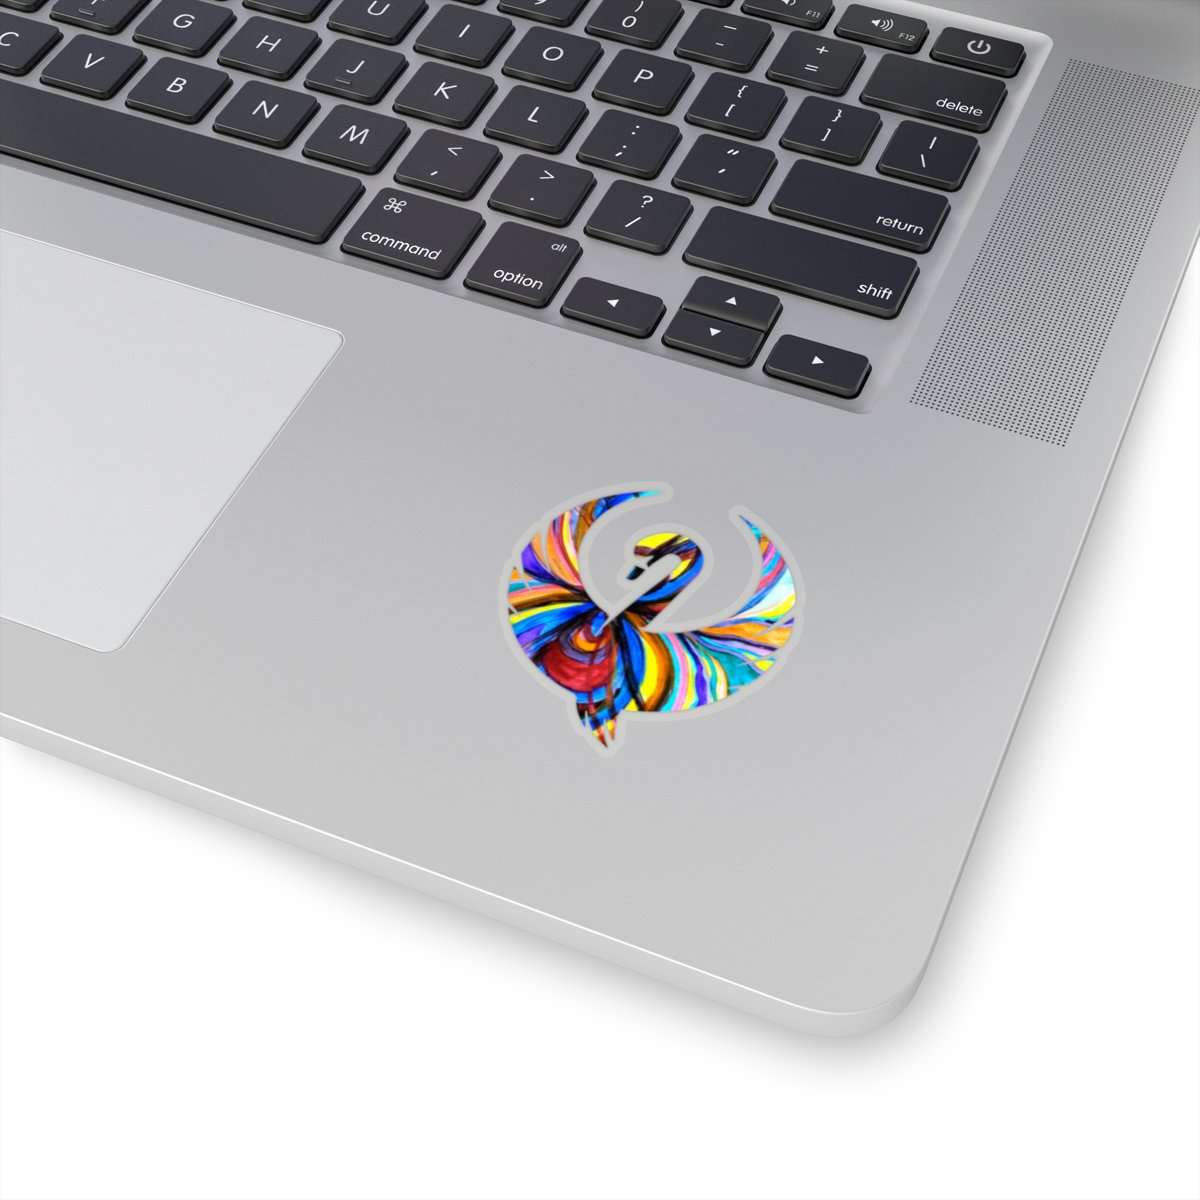 buy-and-sell-relationship-swan-stickers-online-now_1.jpg